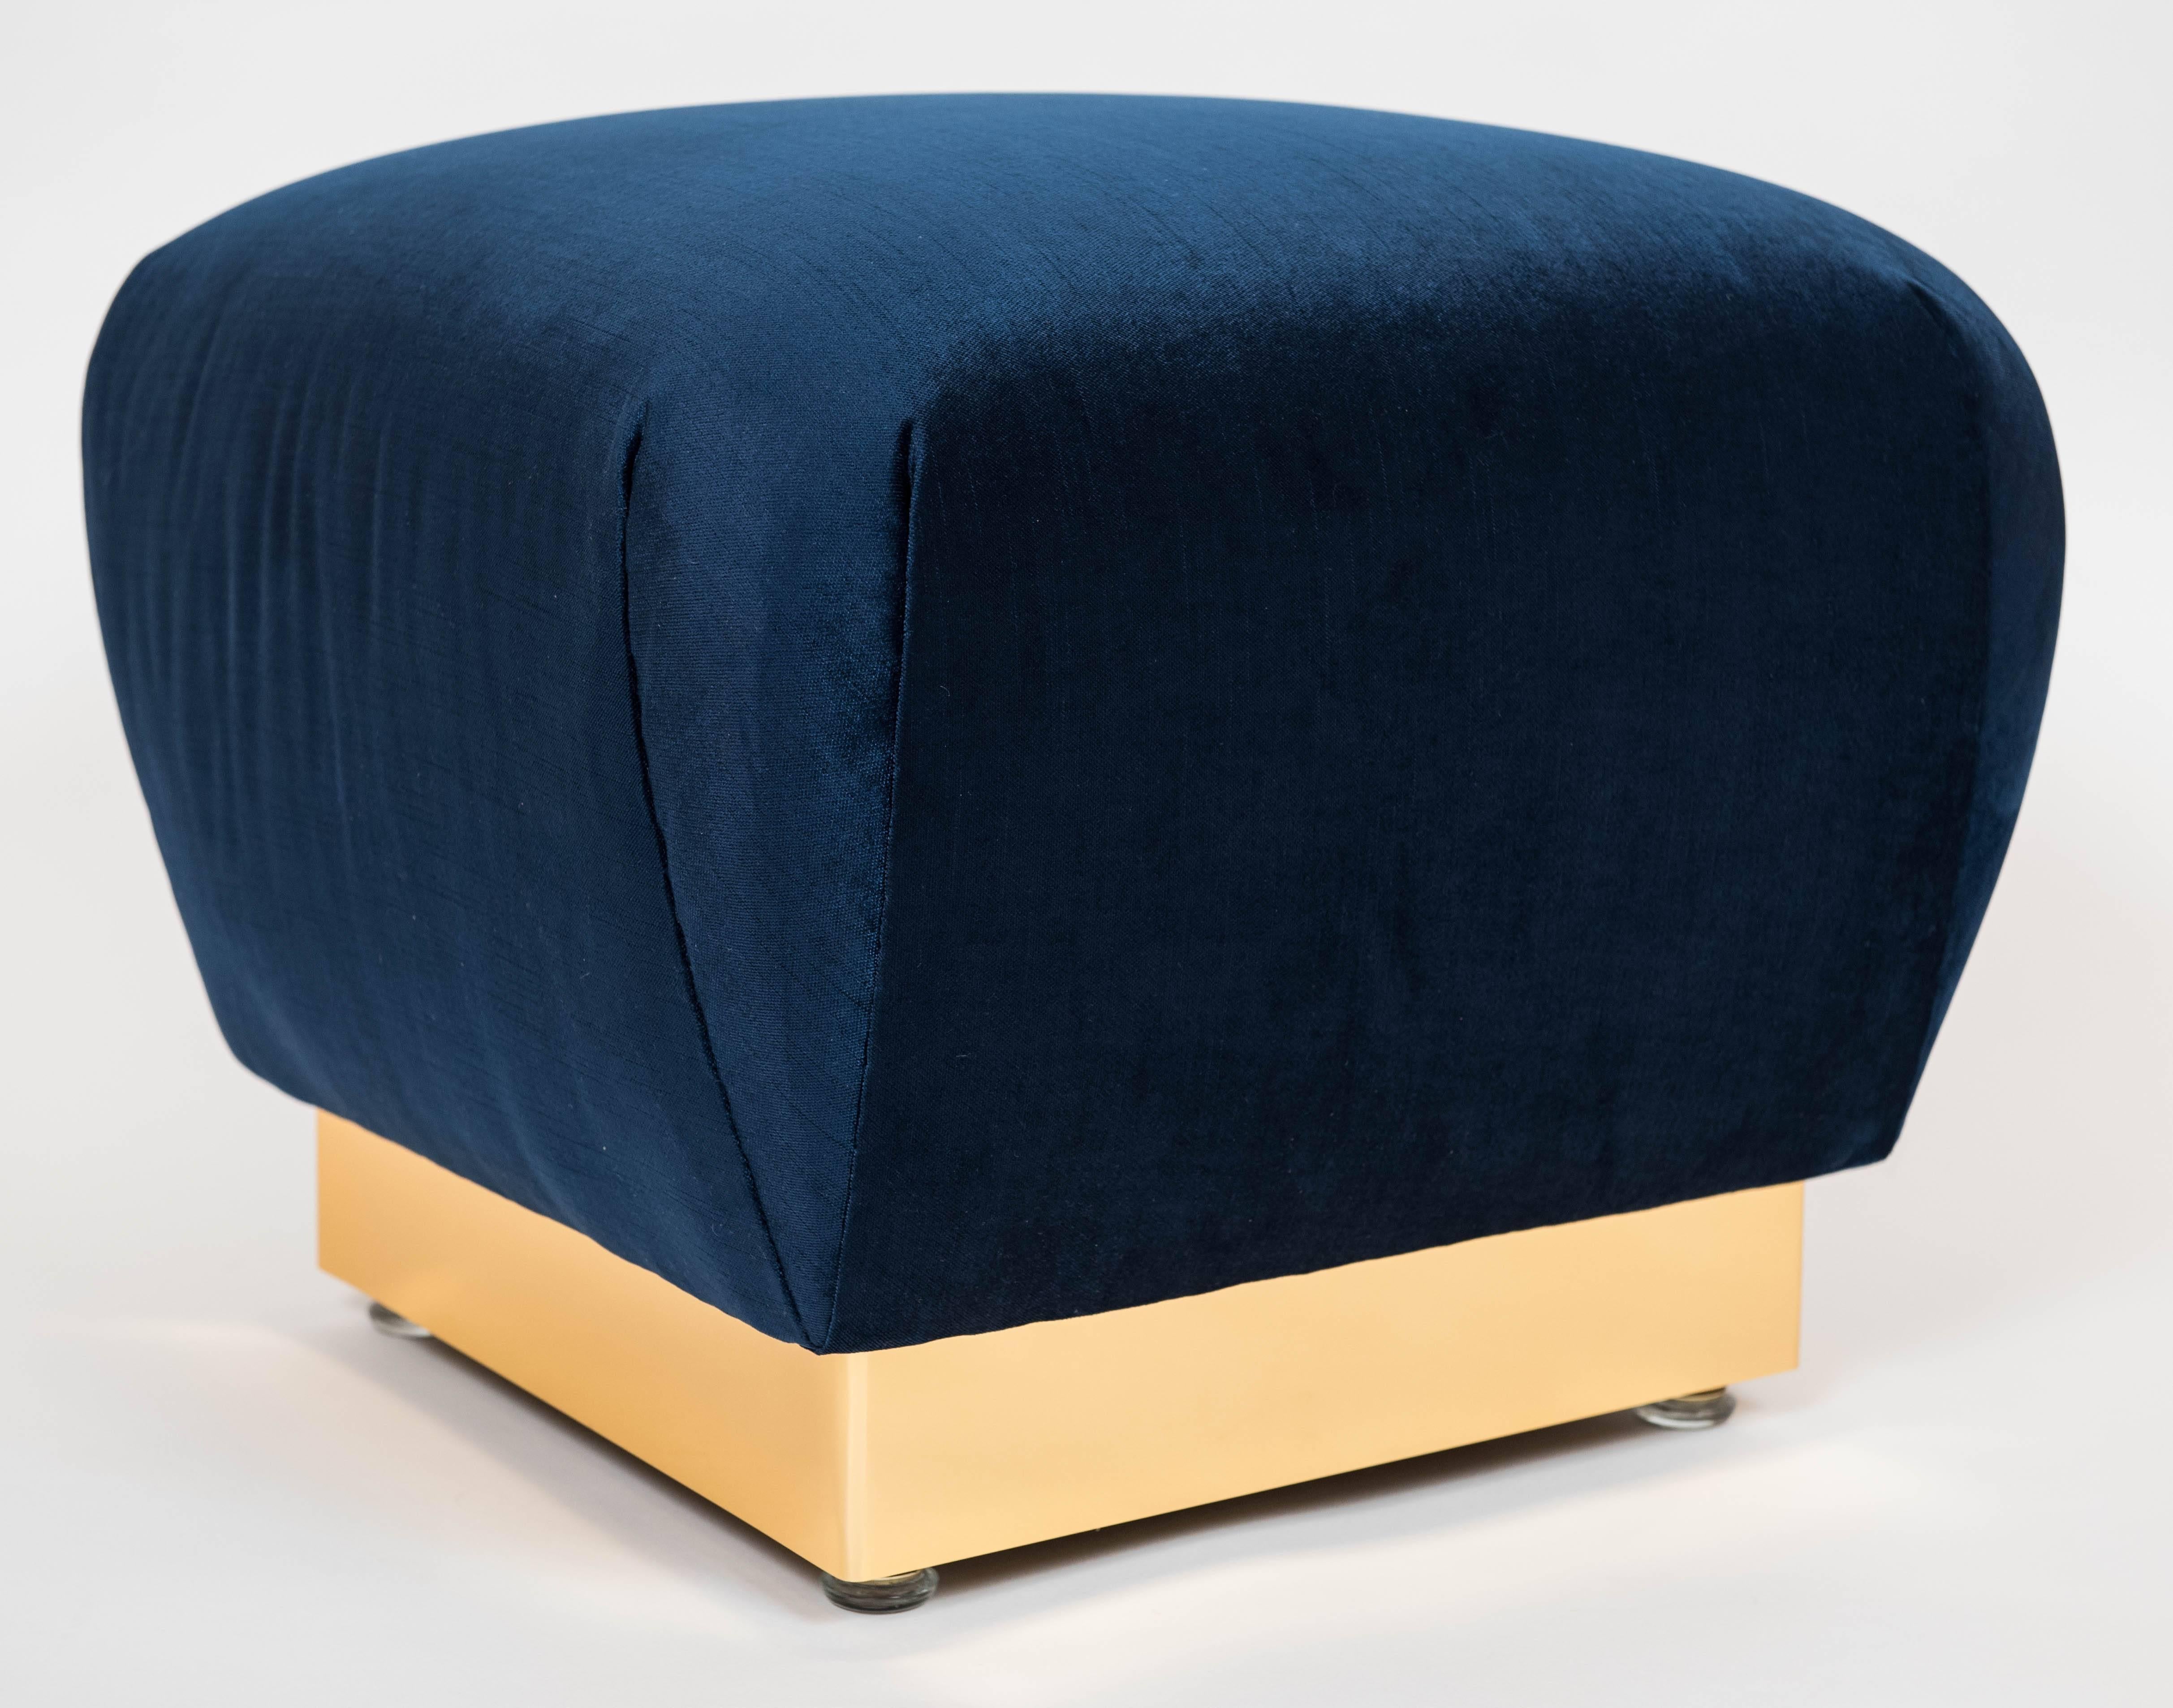 These decadent and stylish poufs have been fully restored with a rich brass tone colored metal trim and new royal blue upholstery. They are in the style made popular by Karl Springer in the 1970s.